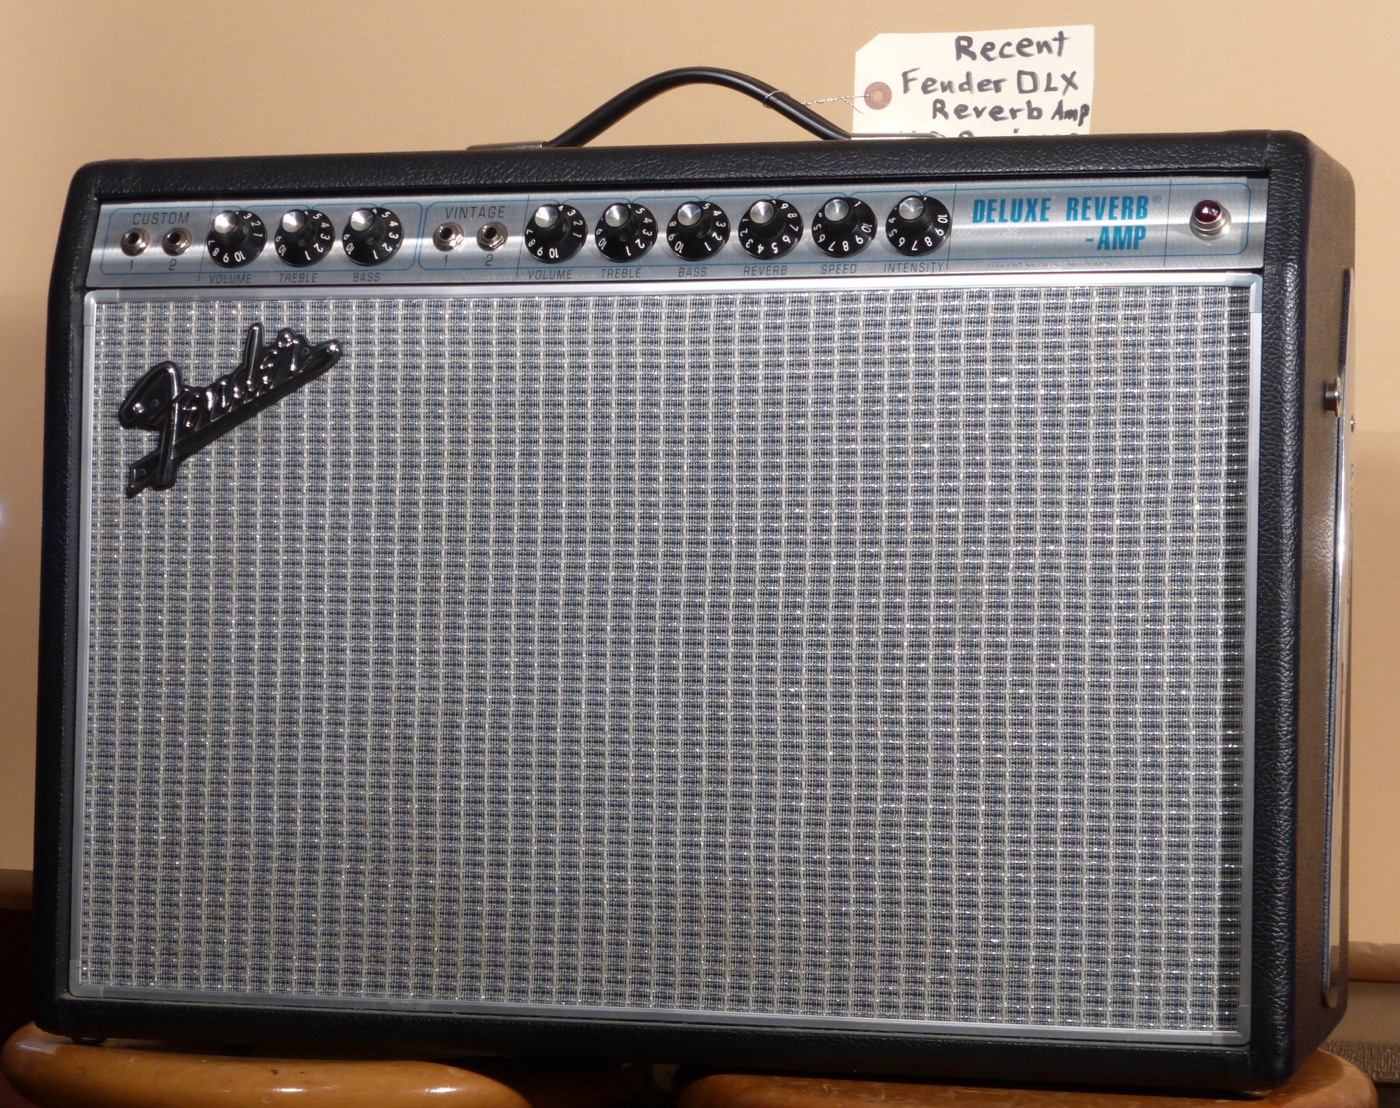 Recent Fender ’68 Deluxe Reverb Product